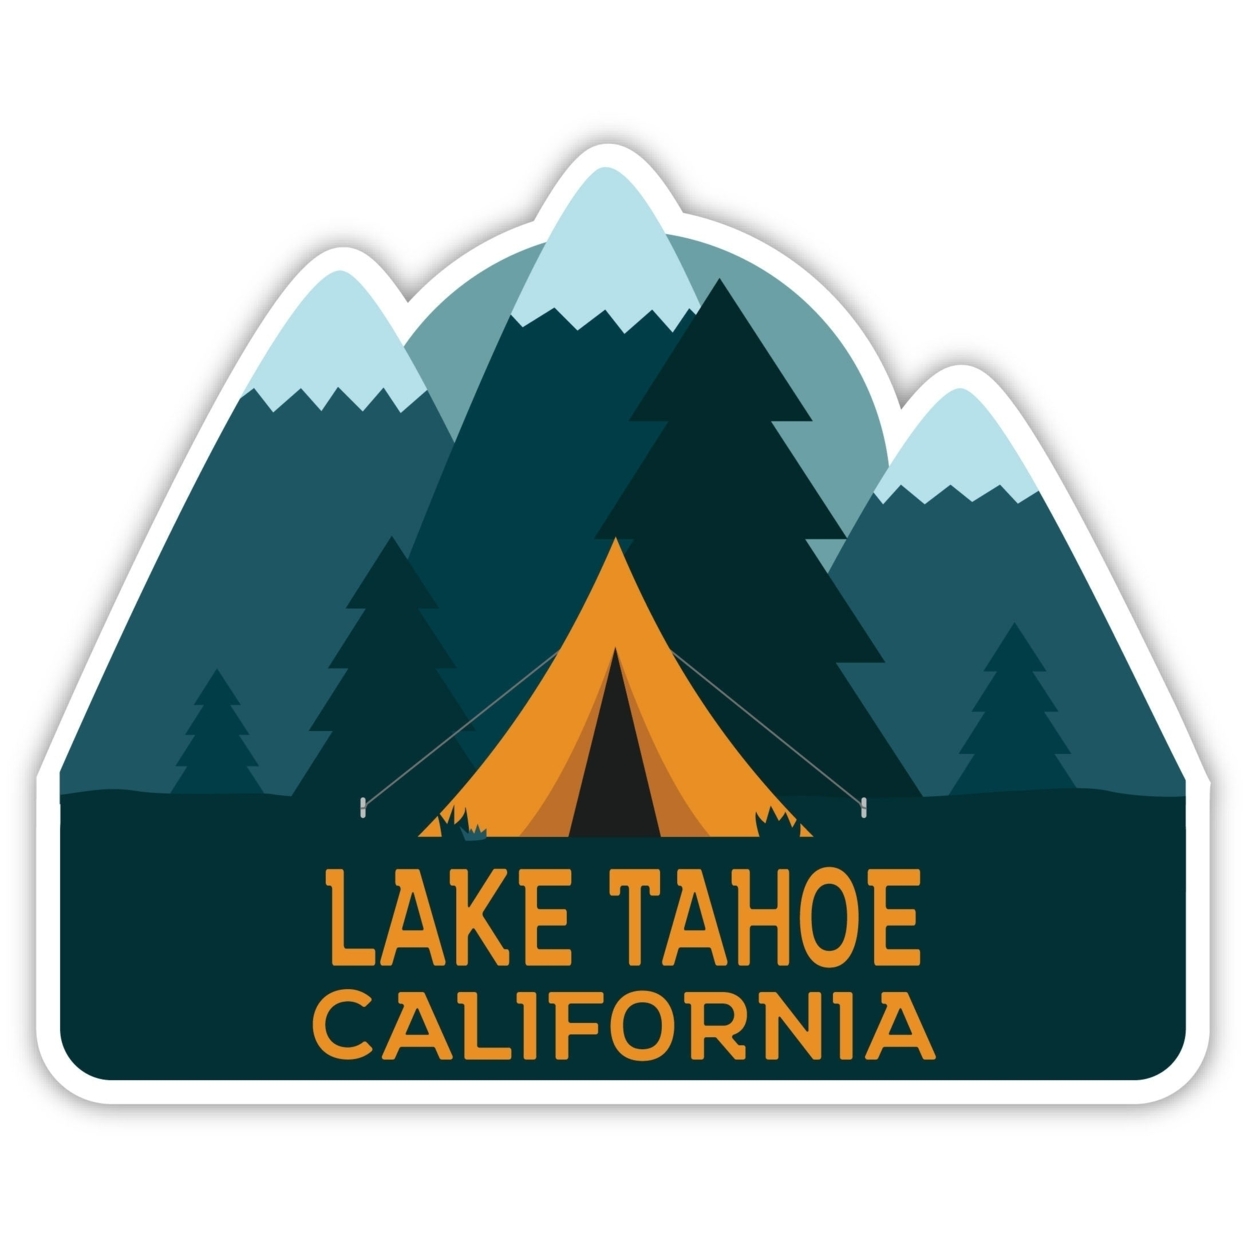 Lake Tahoe California Souvenir Decorative Stickers (Choose Theme And Size) - 2-Inch, Adventures Awaits